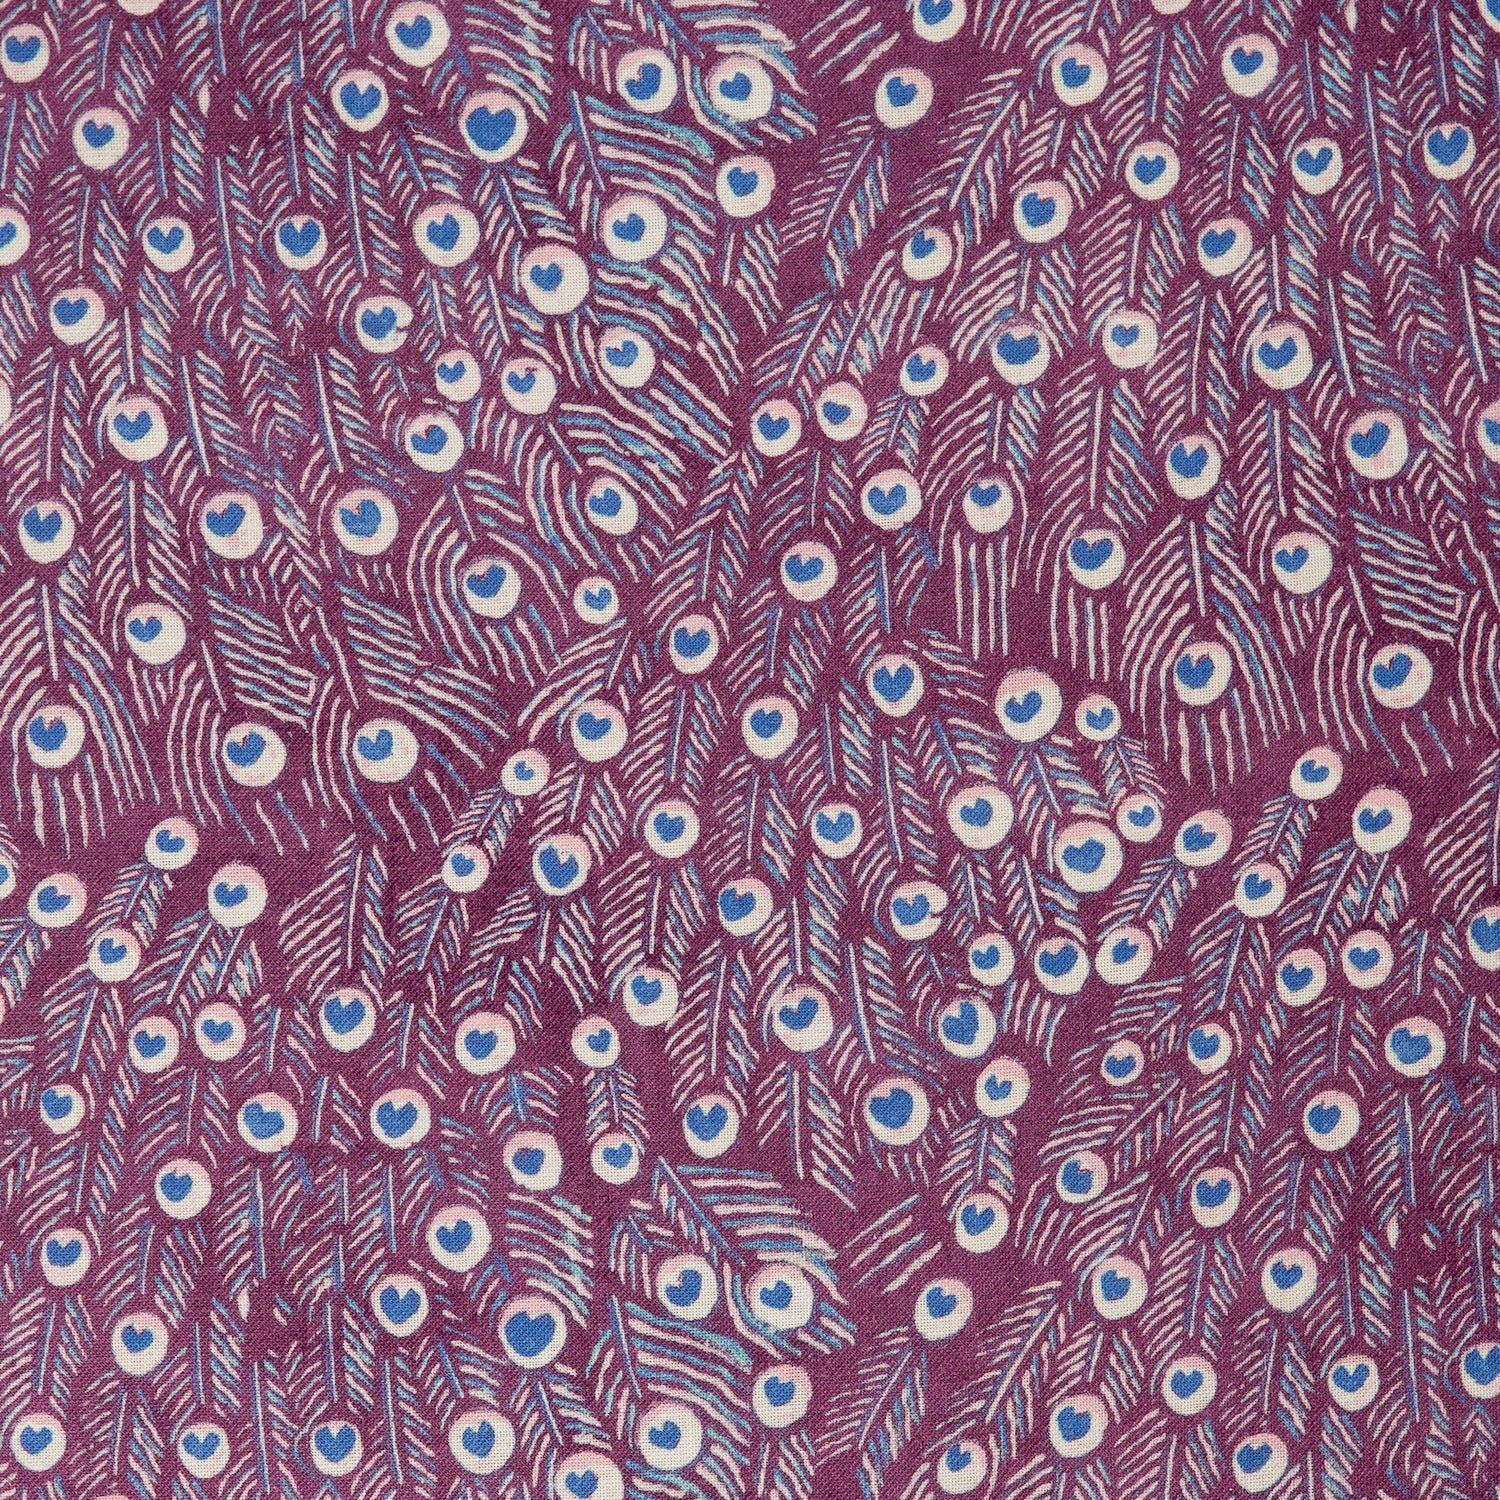 Detail of a linen fabric in a peacock feather pattern in pink and blue on a maroon field.